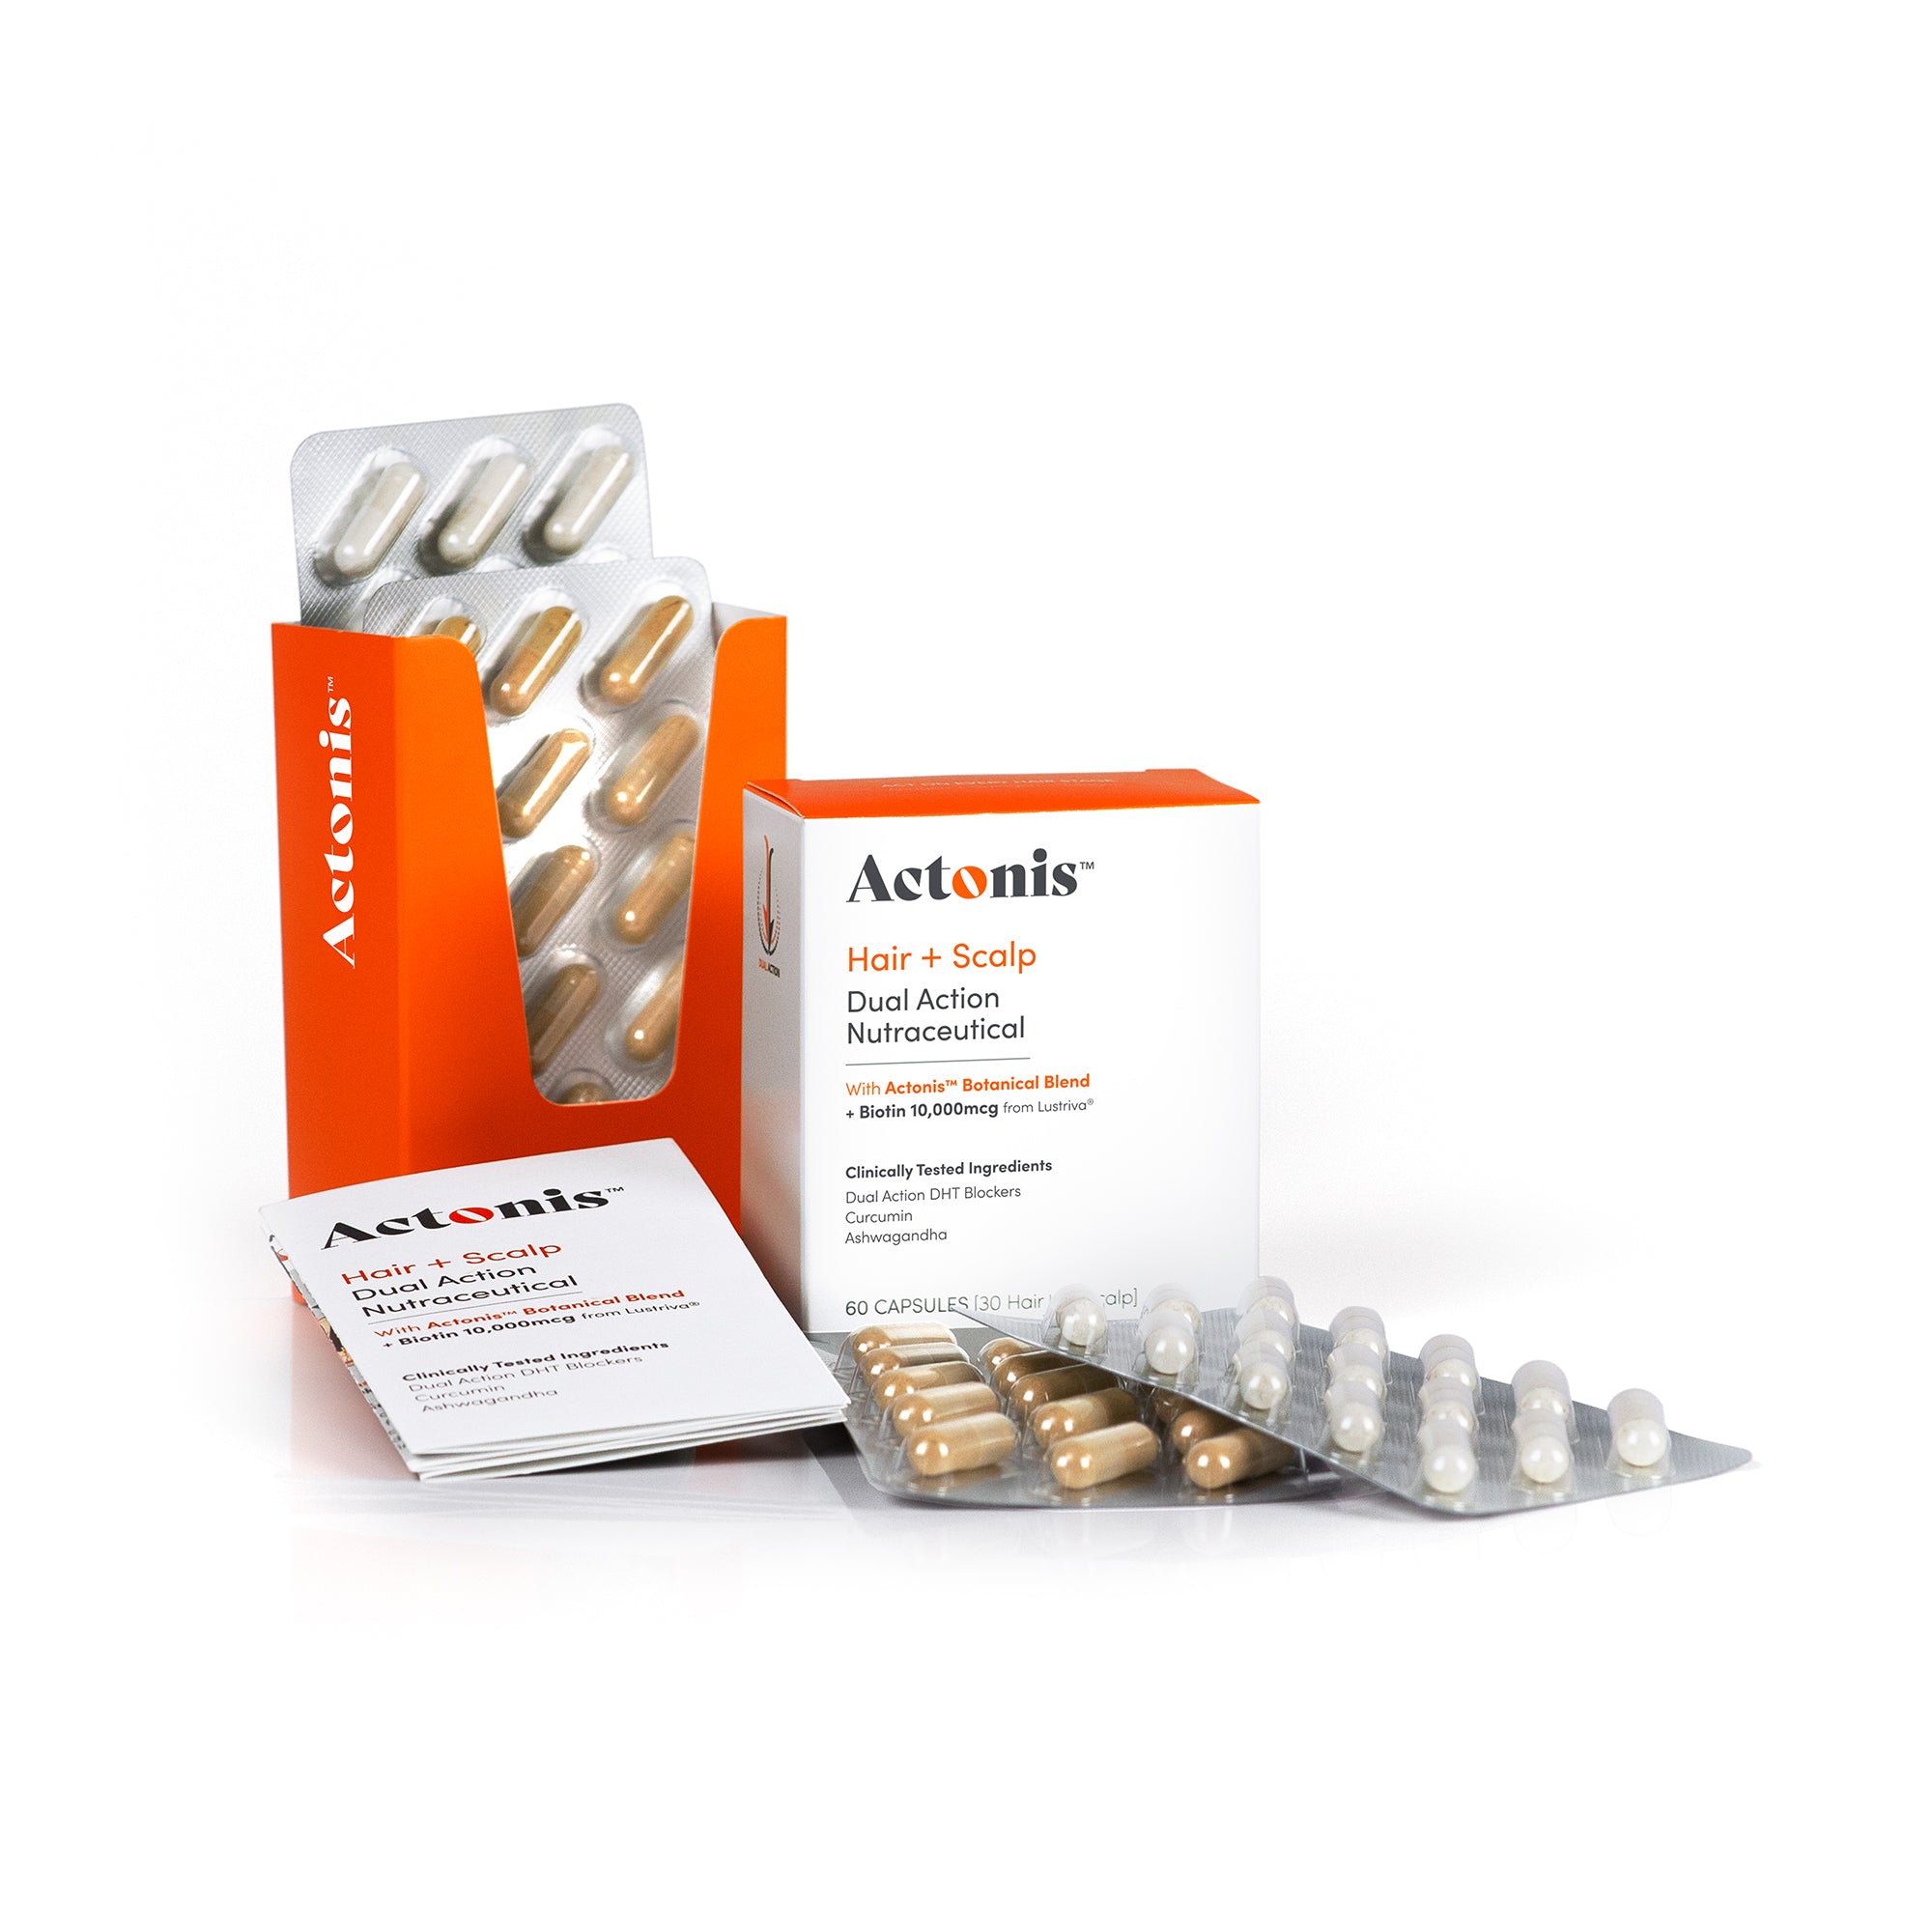 Actonis™ Hair & Scalp Dual Action Nutraceutical